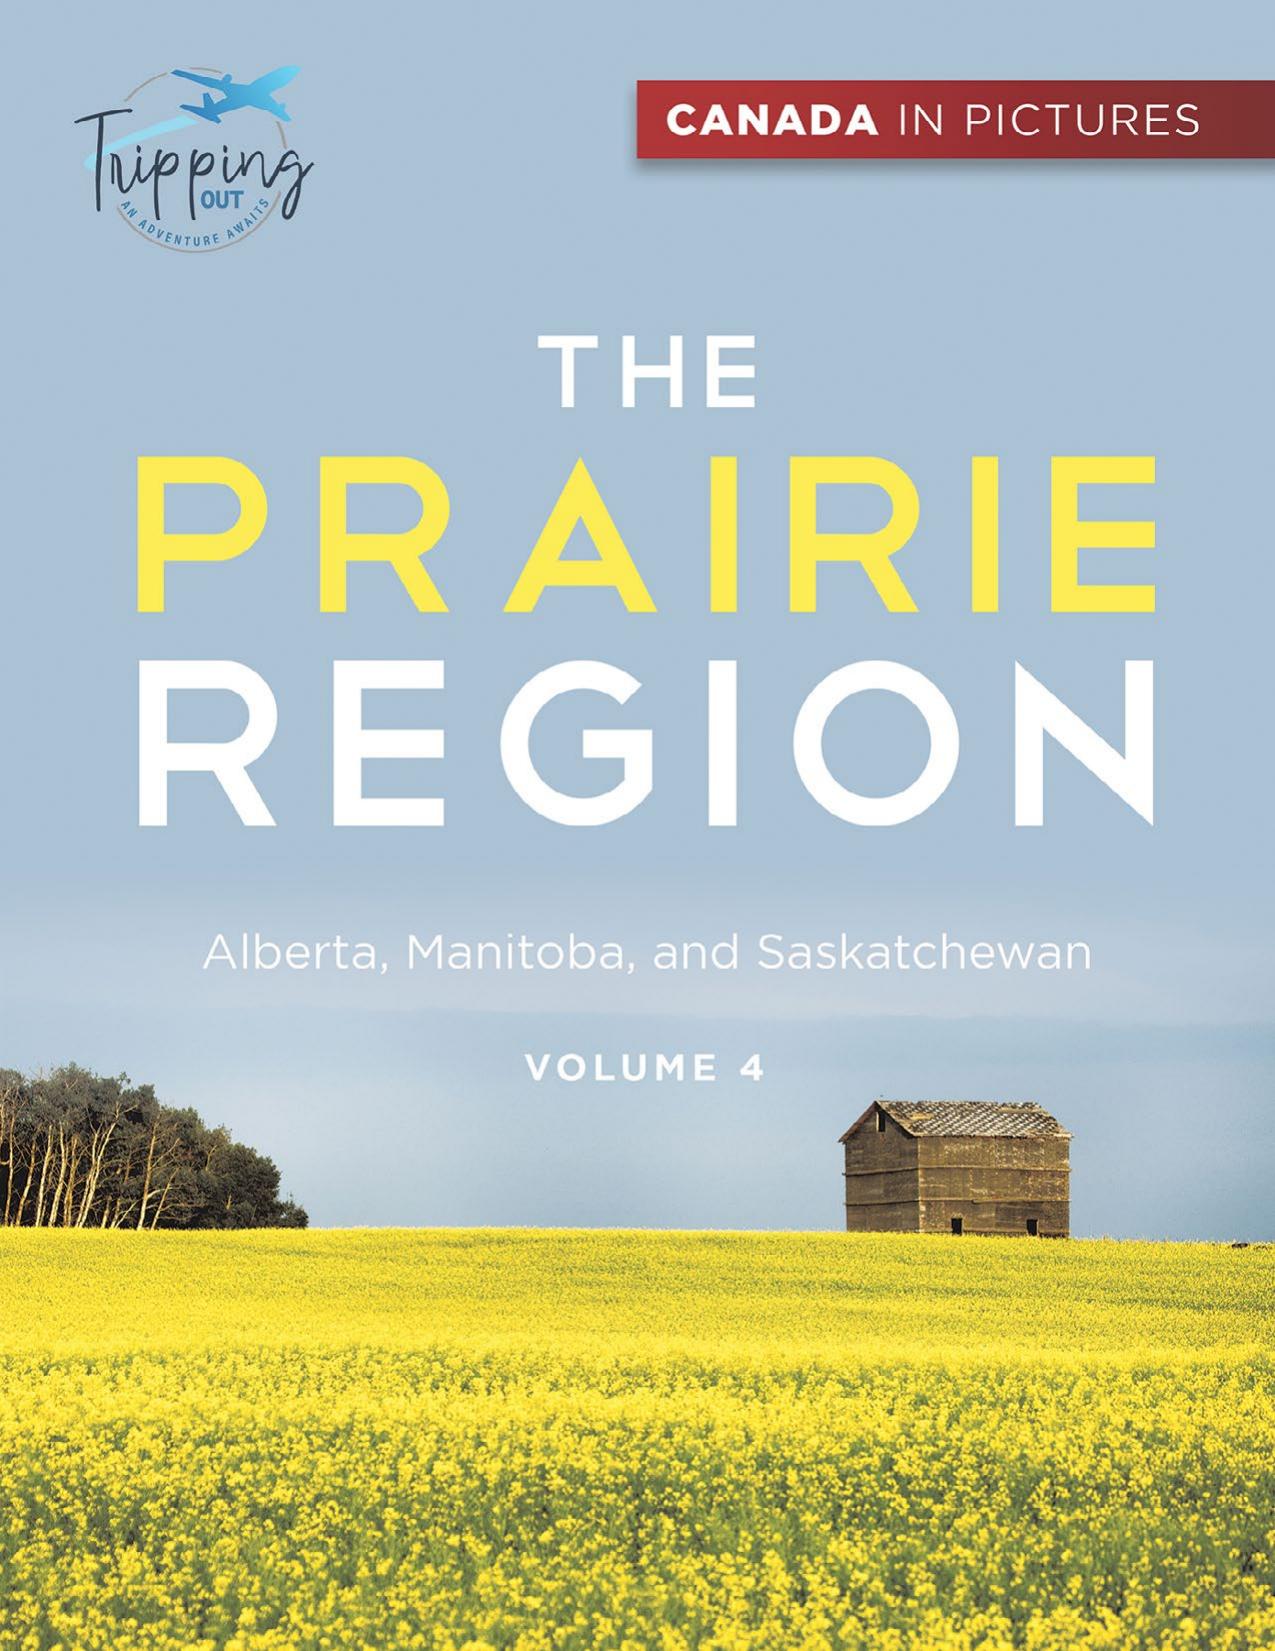 Canada In Pictures--The Prairie Region--Volume 4--Alberta, Manitoba, and Saskatchewan by Tripping Out